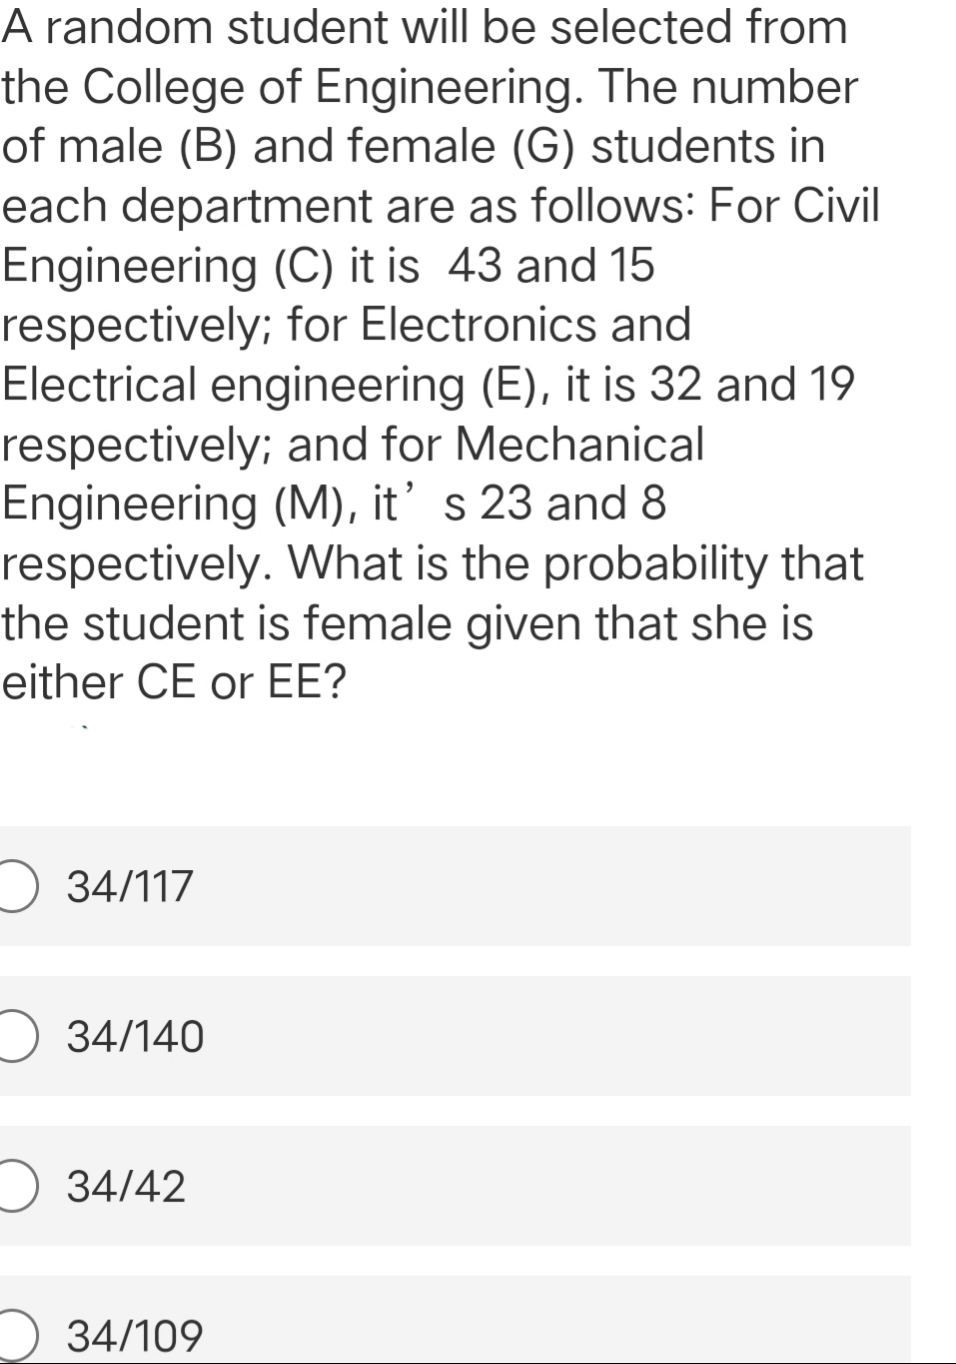 A random student will be selected from
the College of Engineering. The number
of male (B) and female (G) students in
each department are as follows: For Civil
Engineering (C) it is 43 and 15
respectively; for Electronics and
Electrical engineering (E), it is 32 and 19
respectively; and for Mechanical
Engineering (M), it' s 23 and 8
respectively. What is the probability that
the student is female given that she is
either CE or EE?
O 34/117
O 34/140
34/42
34/109